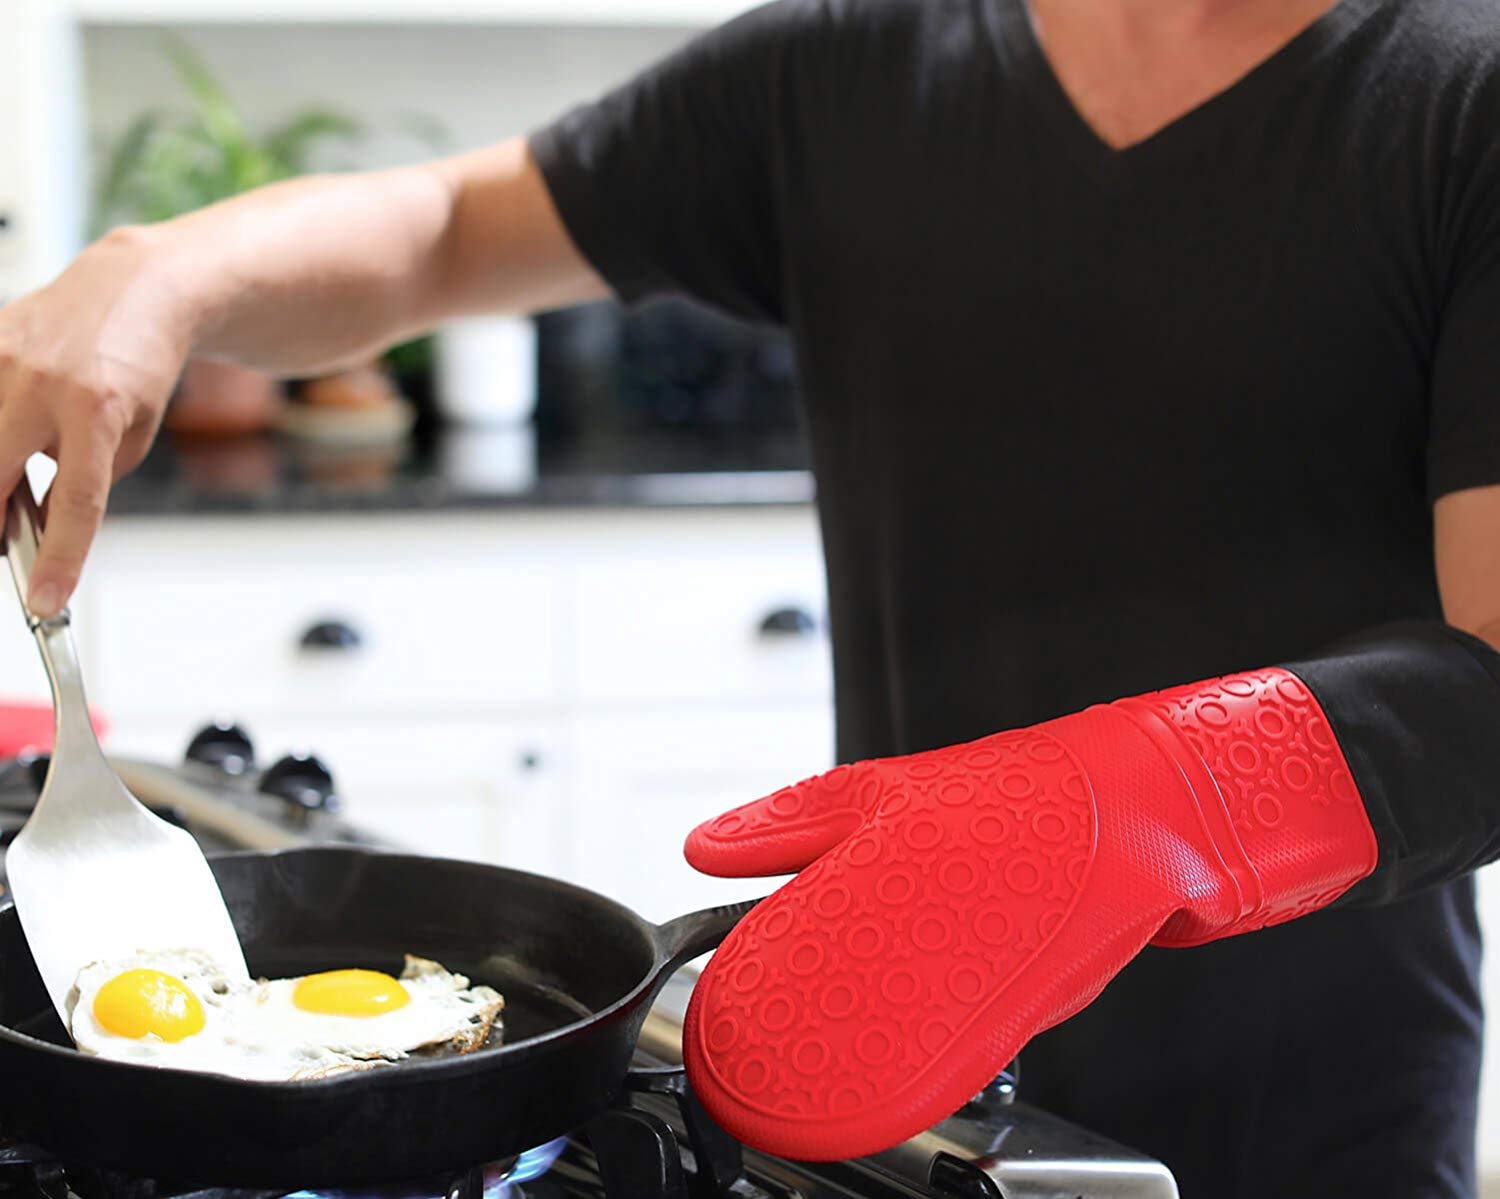 2 for Instant Pot or Kitchen use as Potholder or Baking Holder Mini Oven mitt is Sold in a Pair and Mitten Holders can be Used When Cooking in a Pinch SWISH ABODE Blue Mini Silicone Oven Mitts Set